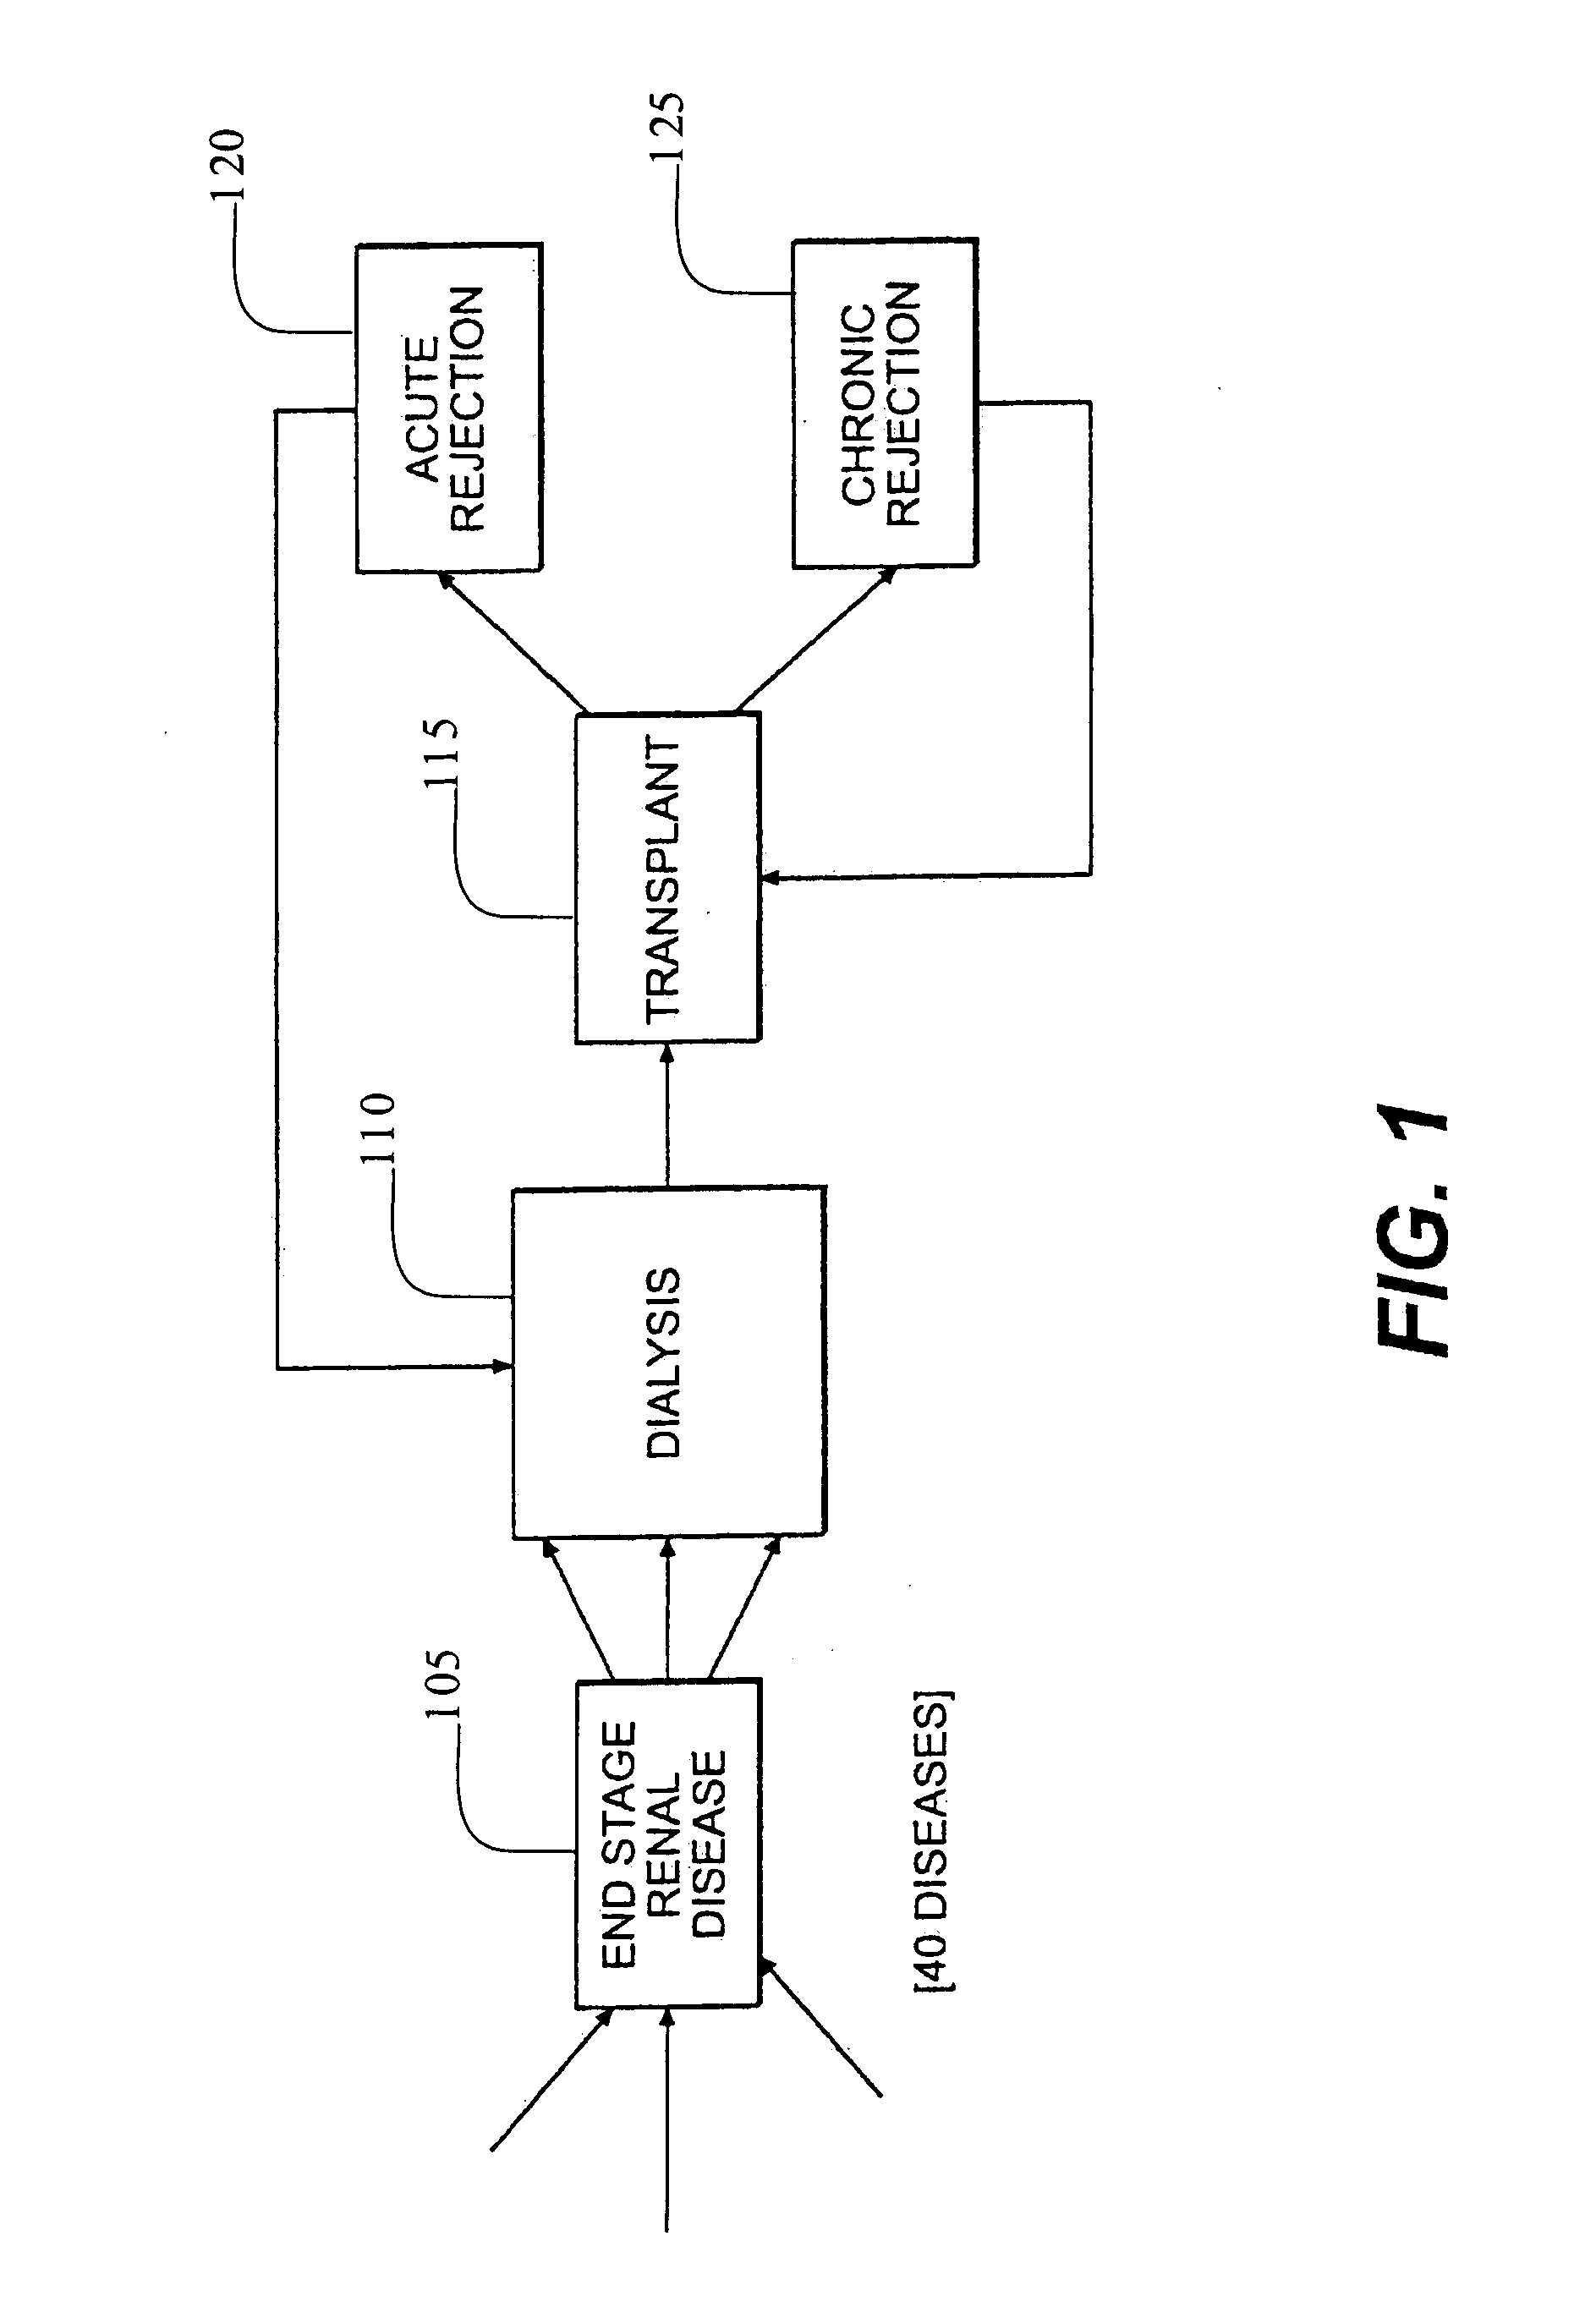 Information processing method and system for synchronization of biomedical data